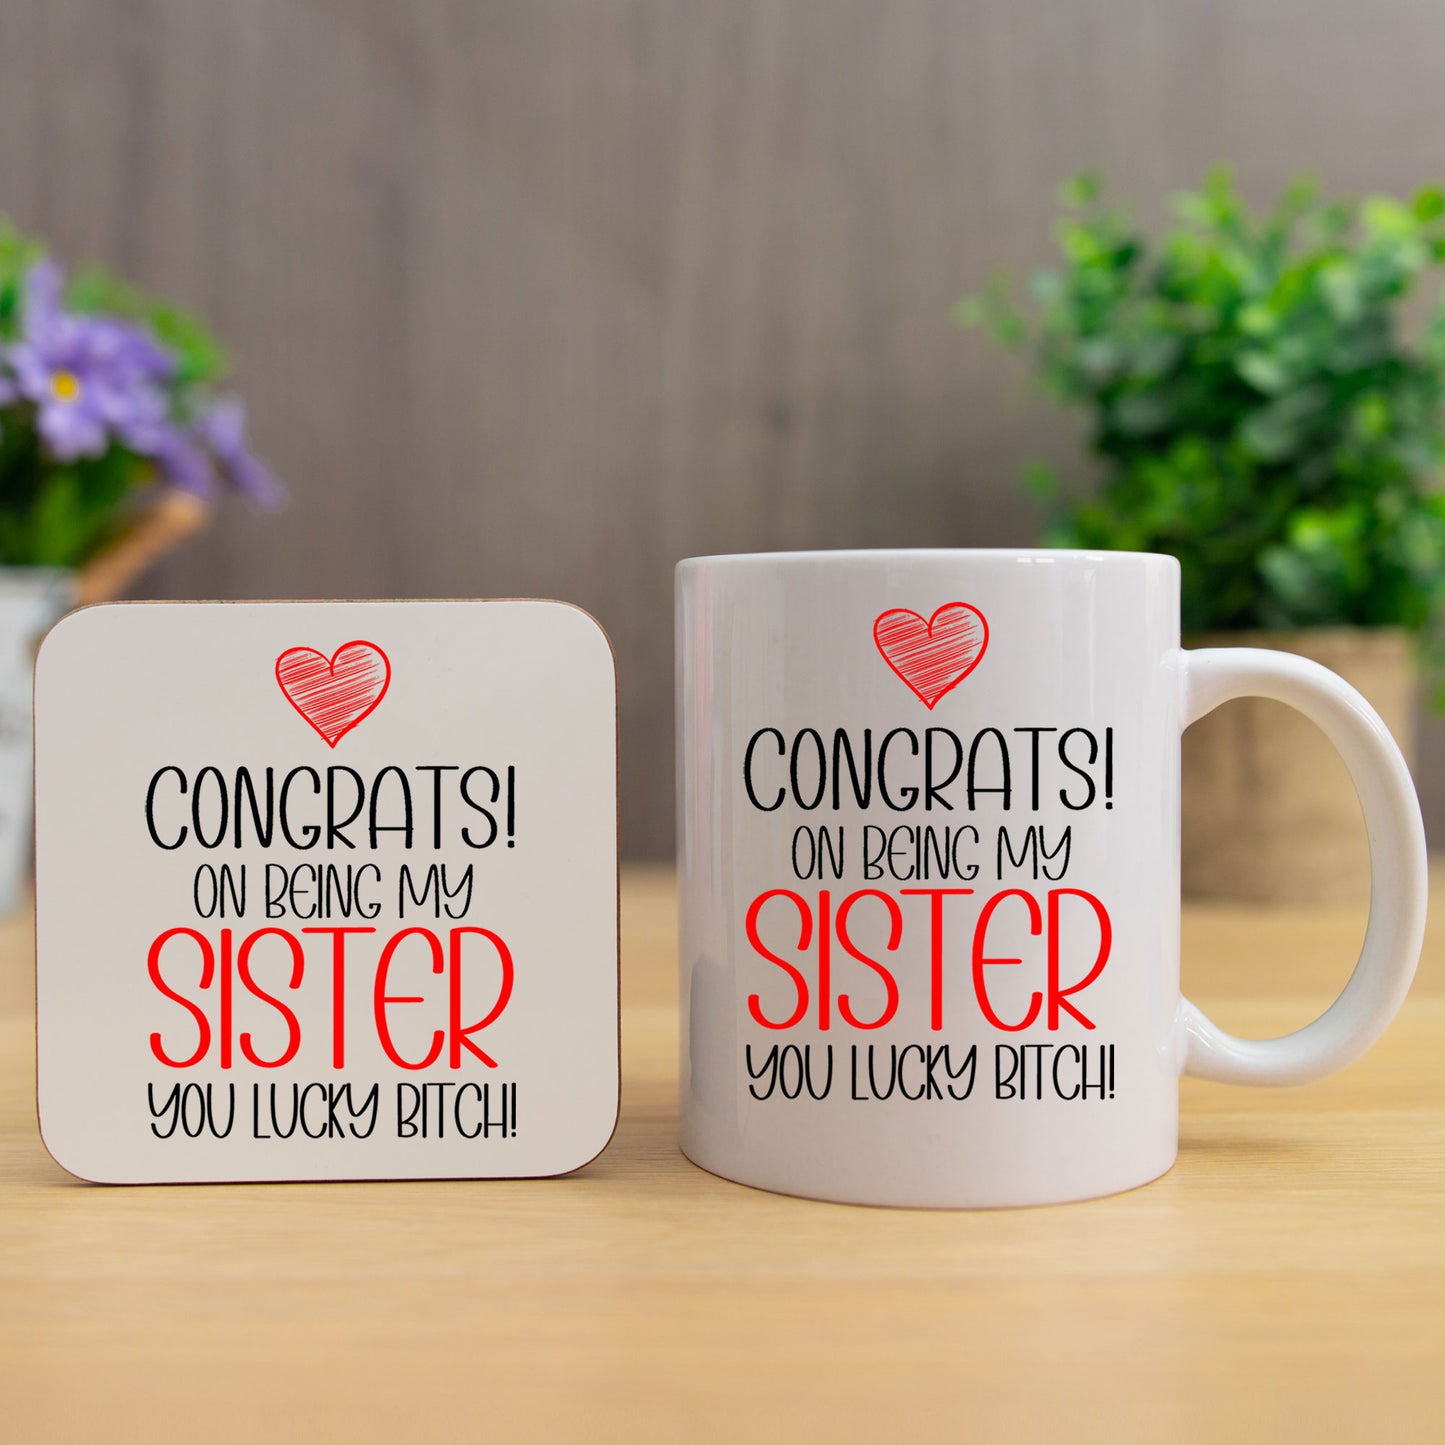 Congrats On Being My Sister Mug and/or Coaster Gift  - Always Looking Good - Lucky Bitch Mug & Coaster Set  